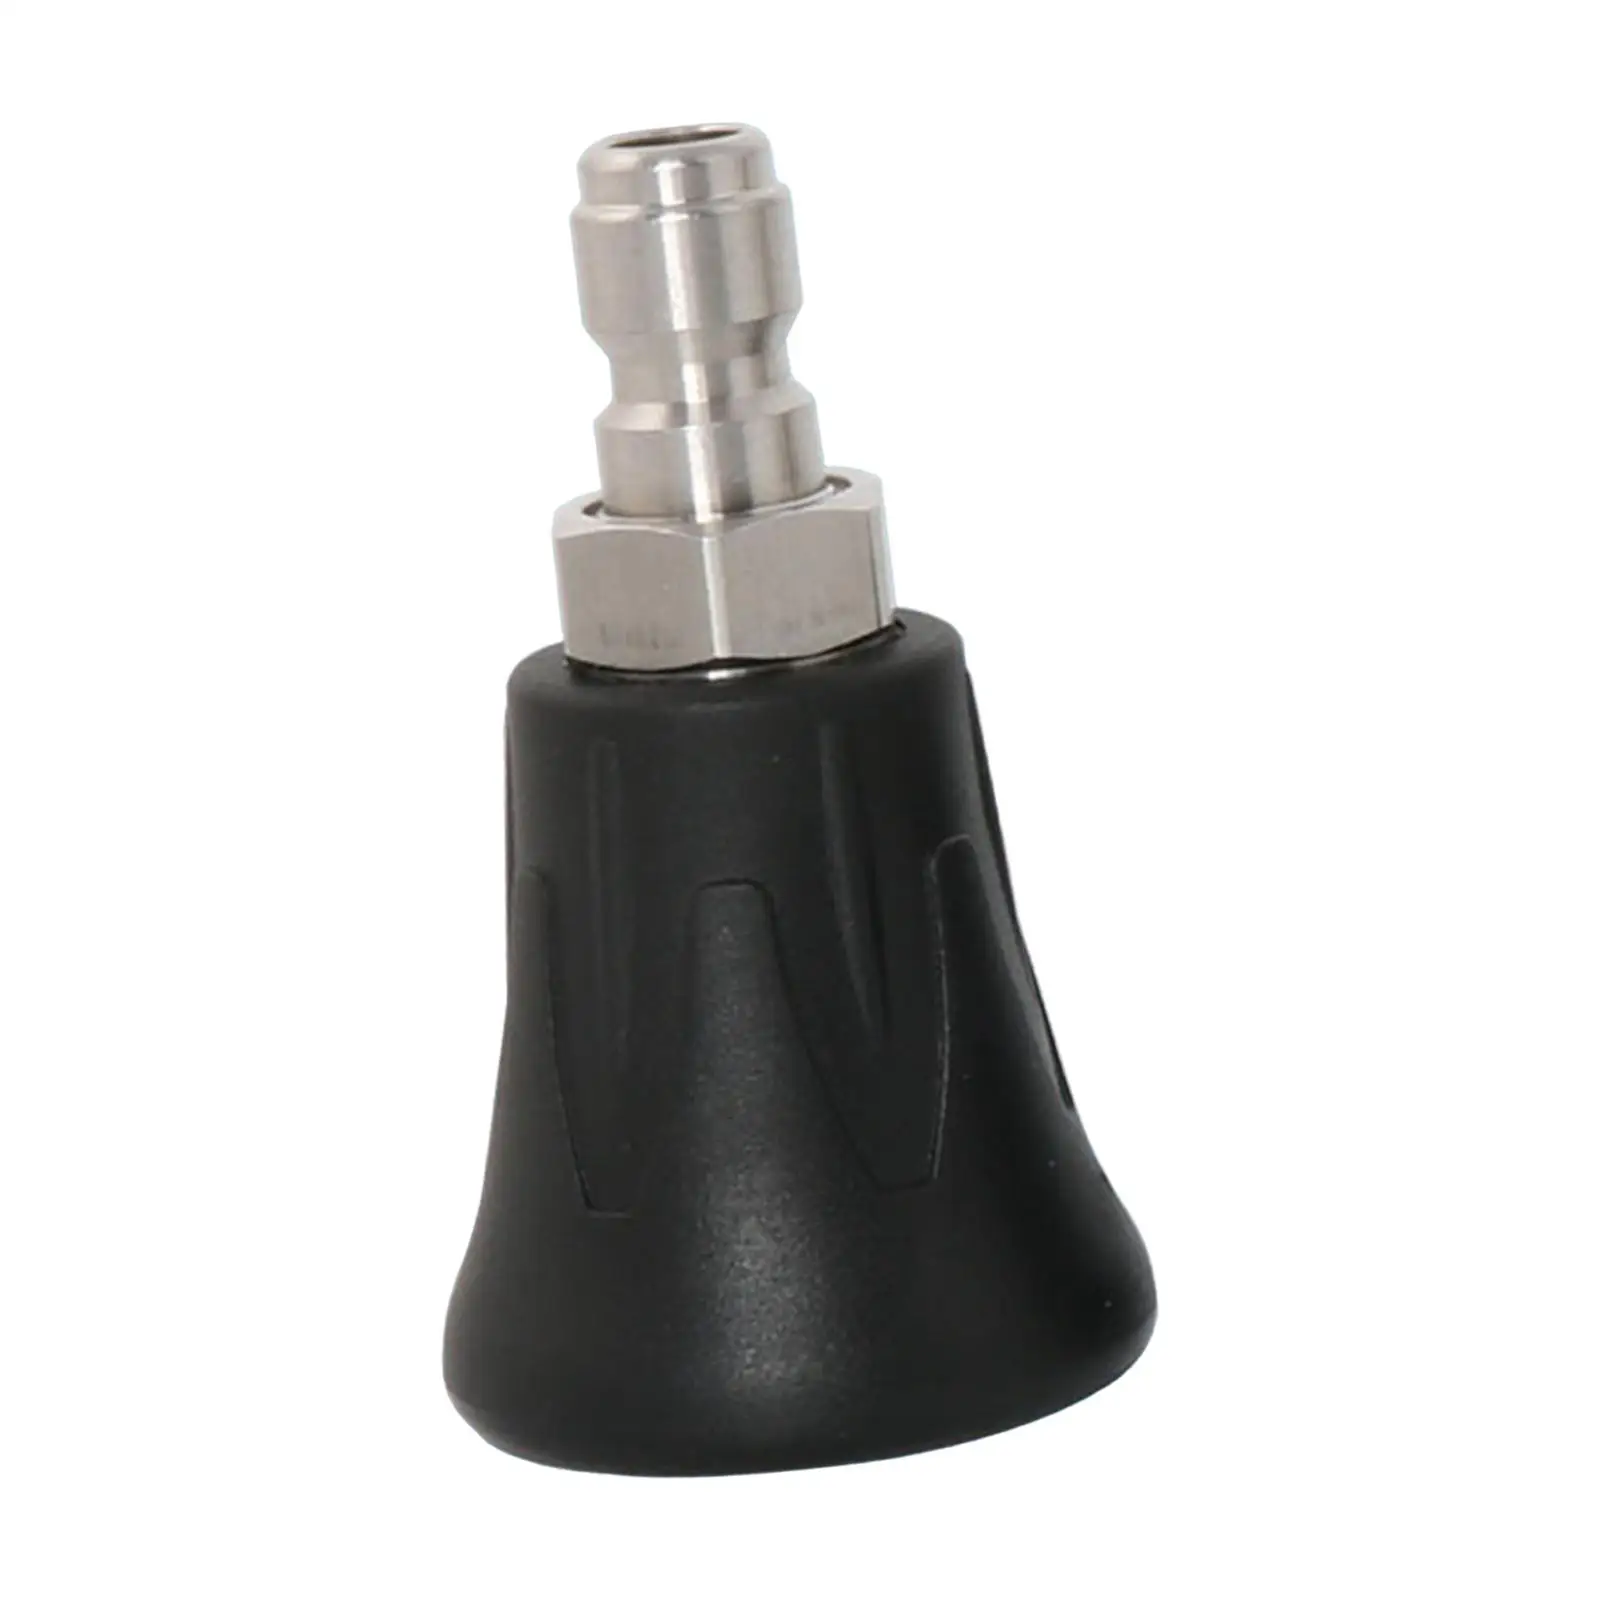 1/4 Pressure Washer Nozzle Household Sheath Nozzle for Cars